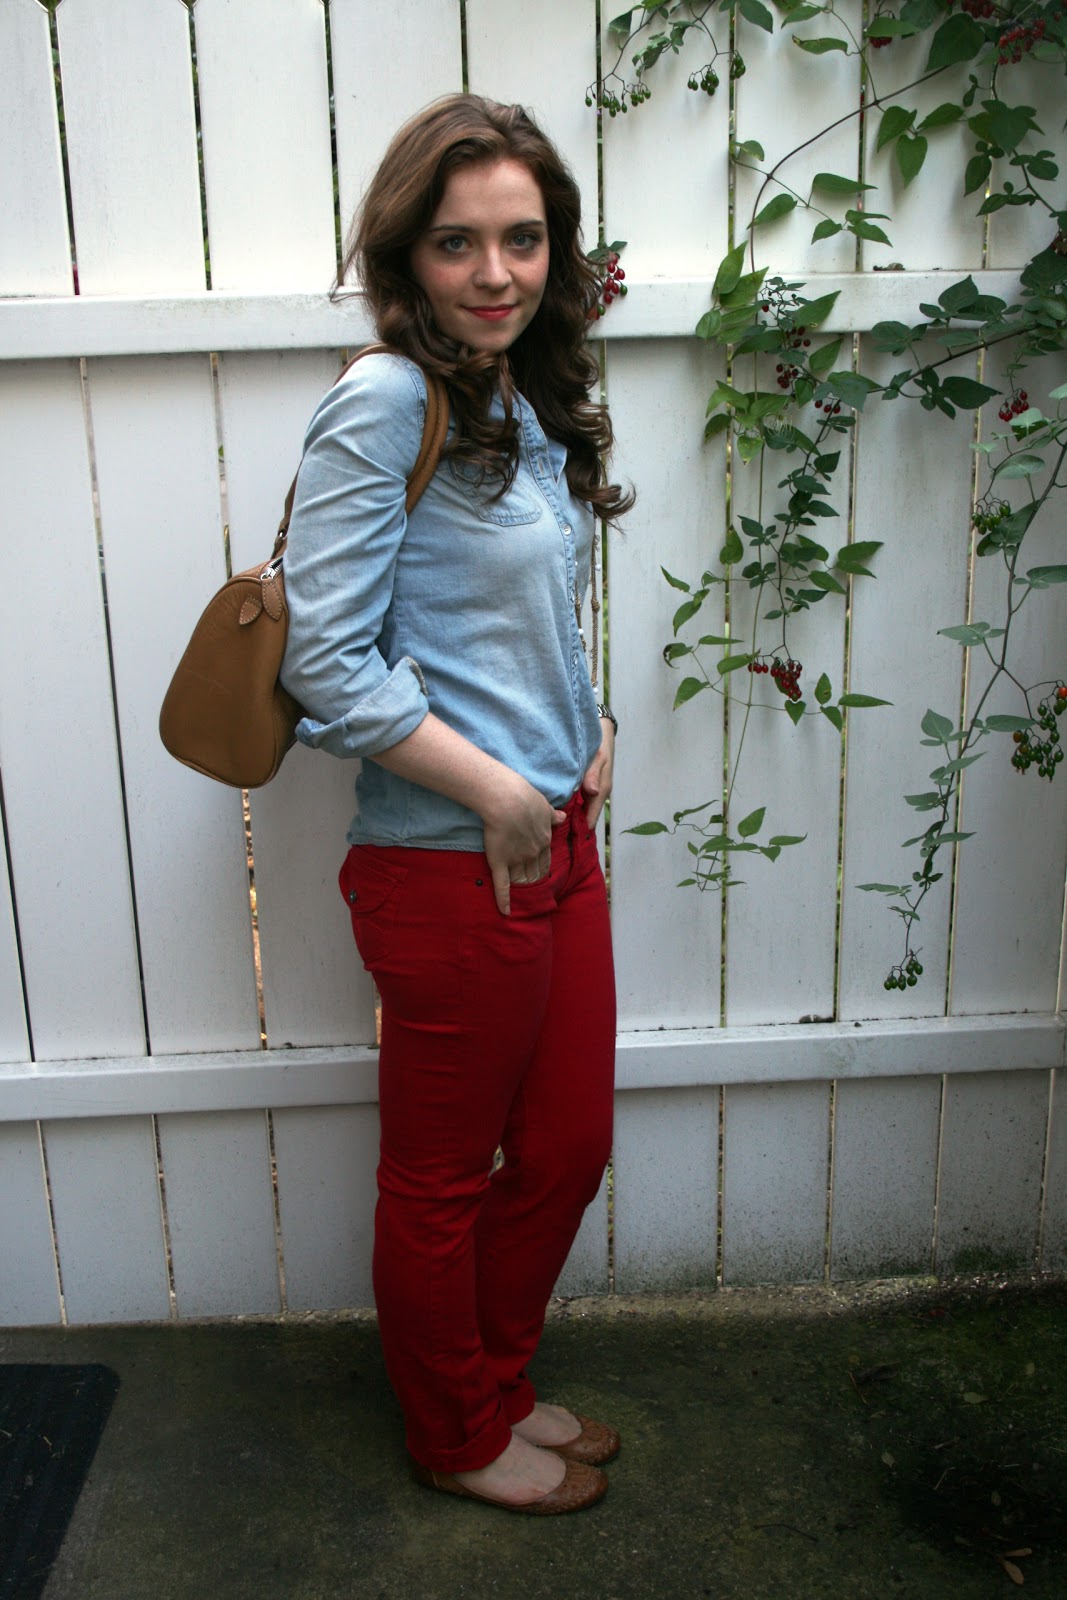 The Red Jeans, Something Good